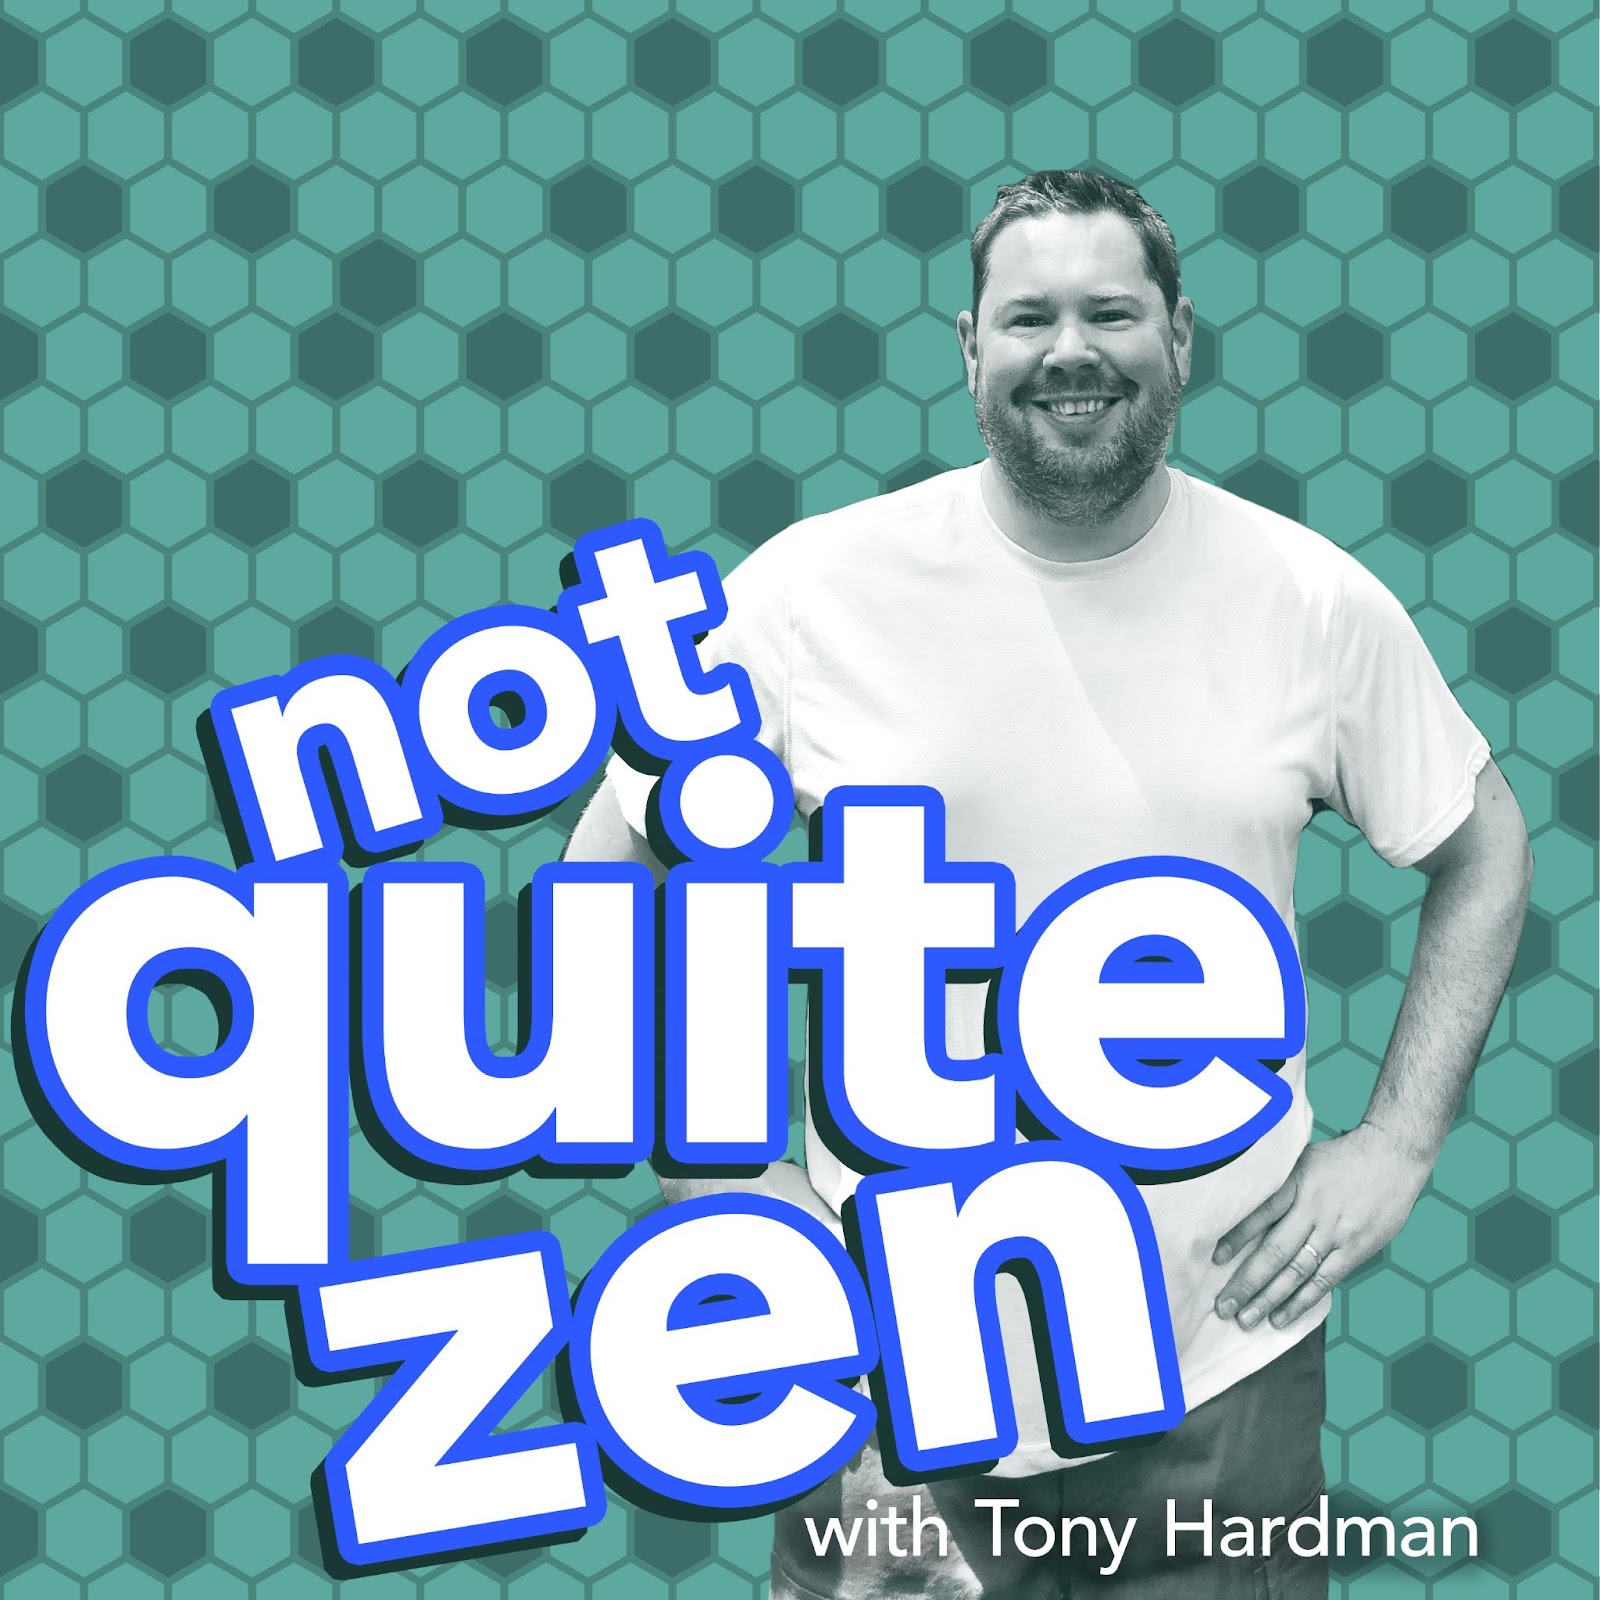 Tony Hardman of Not Quite Zen on His Marketing Strategy and Mental Health Journey